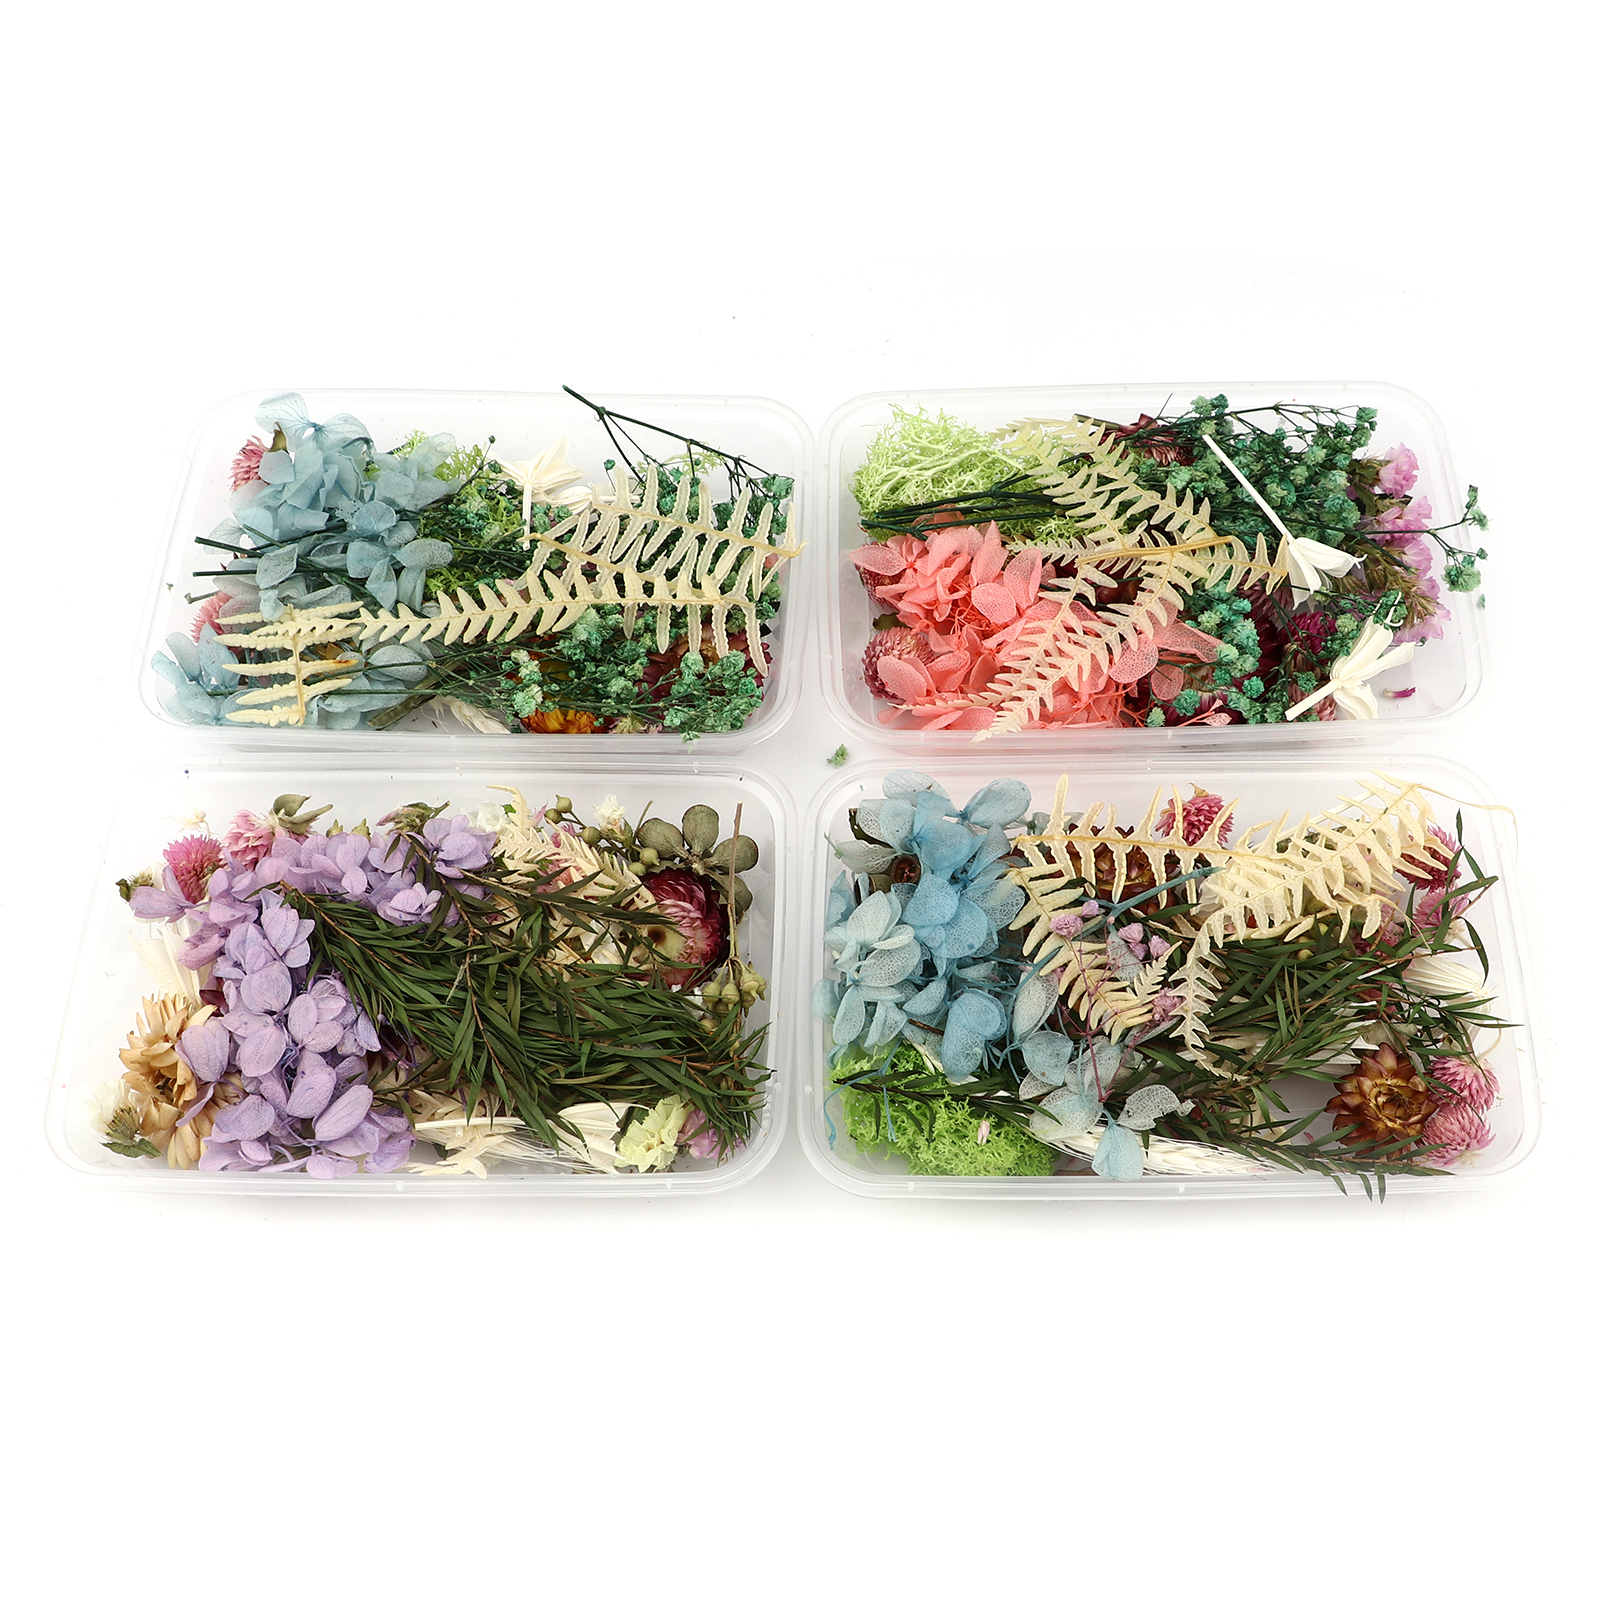 Picture of Real Dried Flower Resin Jewelry Craft Filling Material At Random Color 17cm x 12cm, 1 Box